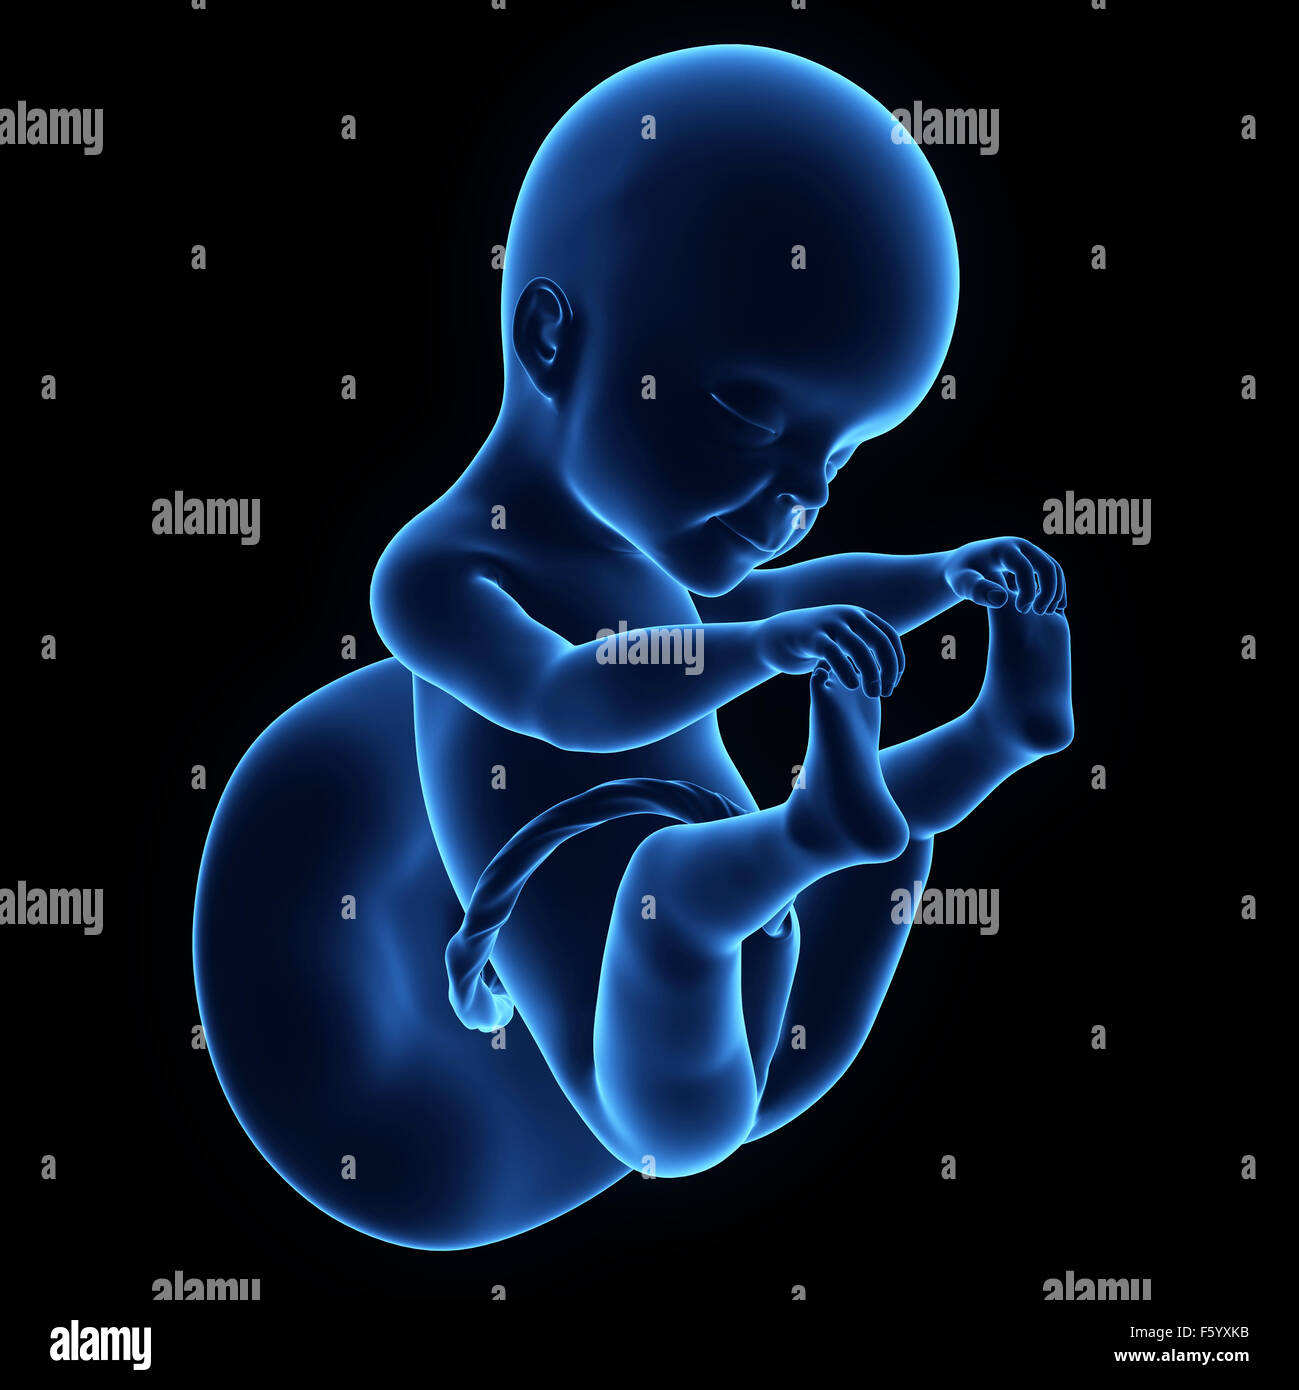 medically accurate illustration of a human fetus week 25 Stock Photo